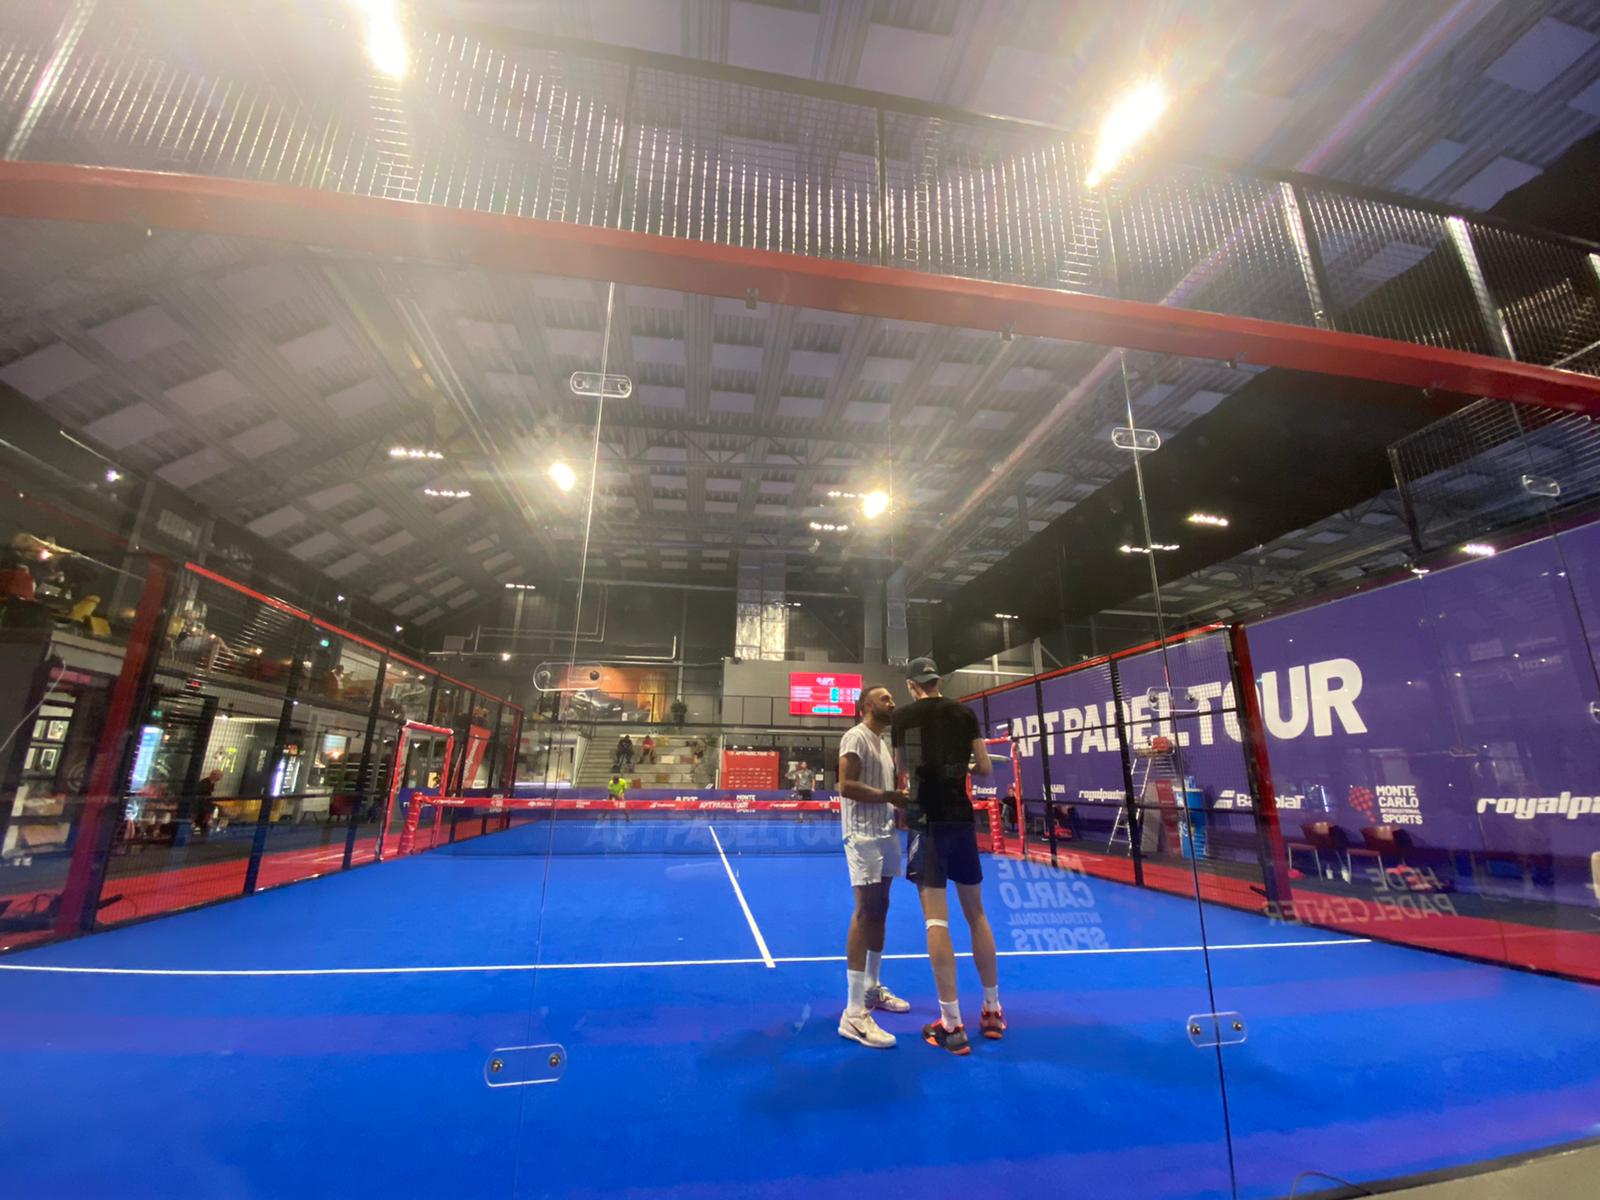 ATP Padel Tour Kungsbacka Open 1 - Results of previas